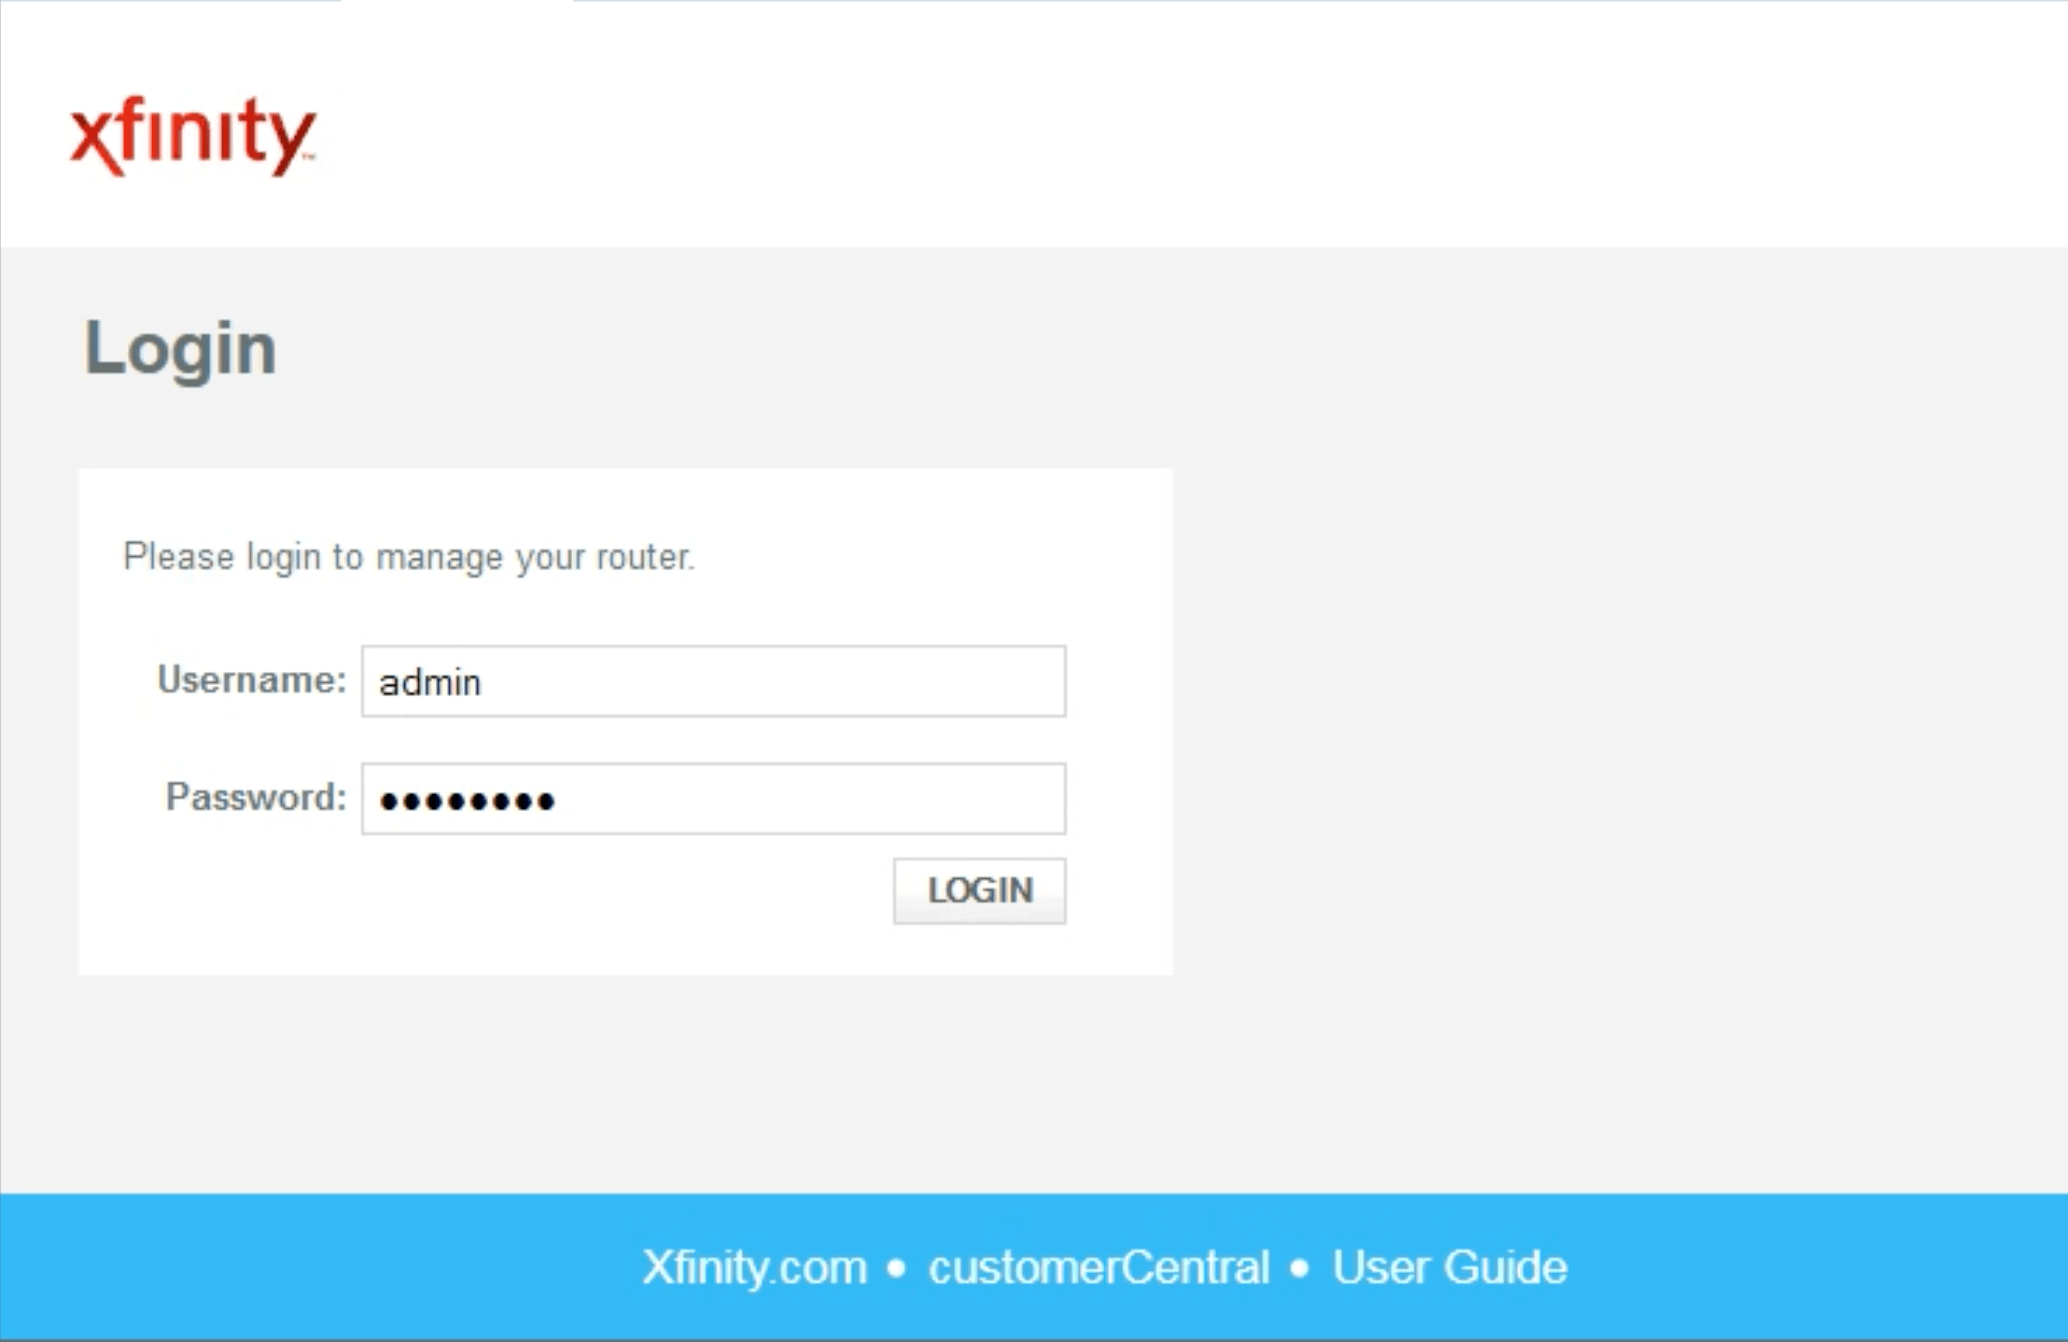 comcast router username and password, password for xfinity wifi, changing xfinity wifi password, how to change my wifi password xfinity, how to change my xfinity wifi password, xfinity password for wifi, admin tool login comcast, comcast admin tool login, password for xfinity modem, comcast modem default password, default comcast router login, sign xfinity, how to change xfinity wifi password, how to change wifi password xfinity, password xfinity router, login comcast, xfinity modem password, xfinity gateway default login, changing wifi password xfinity, xfinity router ip address, default xfinity router password, default password xfinity router, xfinity gateway username and password, what is my xfinity gateway username, access xfinity router, how to change wifi password comcast, reset xfinity password, how to change xfinity wifi name, sign into xfinity wifi, how to reset xfinity router, xfinity login account, how to change wifi password with xfinity, login xfinity wifi, default router password xfinity, change xfinity wifi password, xfinity default router password, gateway xfinity login, xfinity modem login default, how to change router password xfinity, how do i find my xfinity wifi password, xfinity gateway admin tool, how to change your xfinity wifi password, xfinity account login, xfinity login ip, xfinity default modem login, xfinity router website, xfinity default gateway login, xfinity wifi username and password, xfinity modem default login, sign in to xfinity wifi, username and password for xfinity, xfinity wifi name change, comcast sign in, xfinity wifi passwords, how to change wifi password on xfinity, xfinity router ip login, xfinity router, password for comcast router, comcast admin password, password xfinity, xfinity router ip, username and password for xfinity router, xfinity login default, how to reset wifi password xfinity, comcast modem login, wifi password xfinity, comcast router access, xfinity ip address login, how to find my xfinity wifi password, how to log into comcast router, xfinity password wifi, xfinity router address, how to login comcast router, change xfinity wifi name, xfinity password, xfinity admin panel, how to change your wifi password xfinity, xfi default password, xfinity login gateway, comcast router passwords, comcast router admin, xfinity login admin, how to change xfinity wifi password without logging in, xfinity login wifi password, forgot my xfinity wifi password, how to reset xfinity wifi password, forgot wifi password xfinity, comcast wifi password, xfinity passwords for wifi, xfinity wifi settings login, admin tool login, account xfinity, xfinity router settings, xfinity default wifi password, router xfinity, xfinity username and password, xfinity modem router login, xfinity router login ip address, comcast com login, how to find xfinity gateway username and password, comcast modem default login, xfinity default password, forgot xfinity router admin password, comcast modem password, comcast router logs, what is my xfinity gateway login, xfinity change wifi name, xfi router login, change wifi name xfinity, xfinity admin ip, connect to xfinity router, xfinity wifi address, change my xfinity wifi password, xfinity connect login, i forgot my xfinity wifi password, xfinity ip login, default admin password xfinity router, how to find out xfinity wifi password, how to get my xfinity wifi password, how do i change xfinity wifi password, xfinity wireless gateway admin tool, reset password xfinity router, xfinity wpa2 password, connect to comcast router, comcast router login ip, 